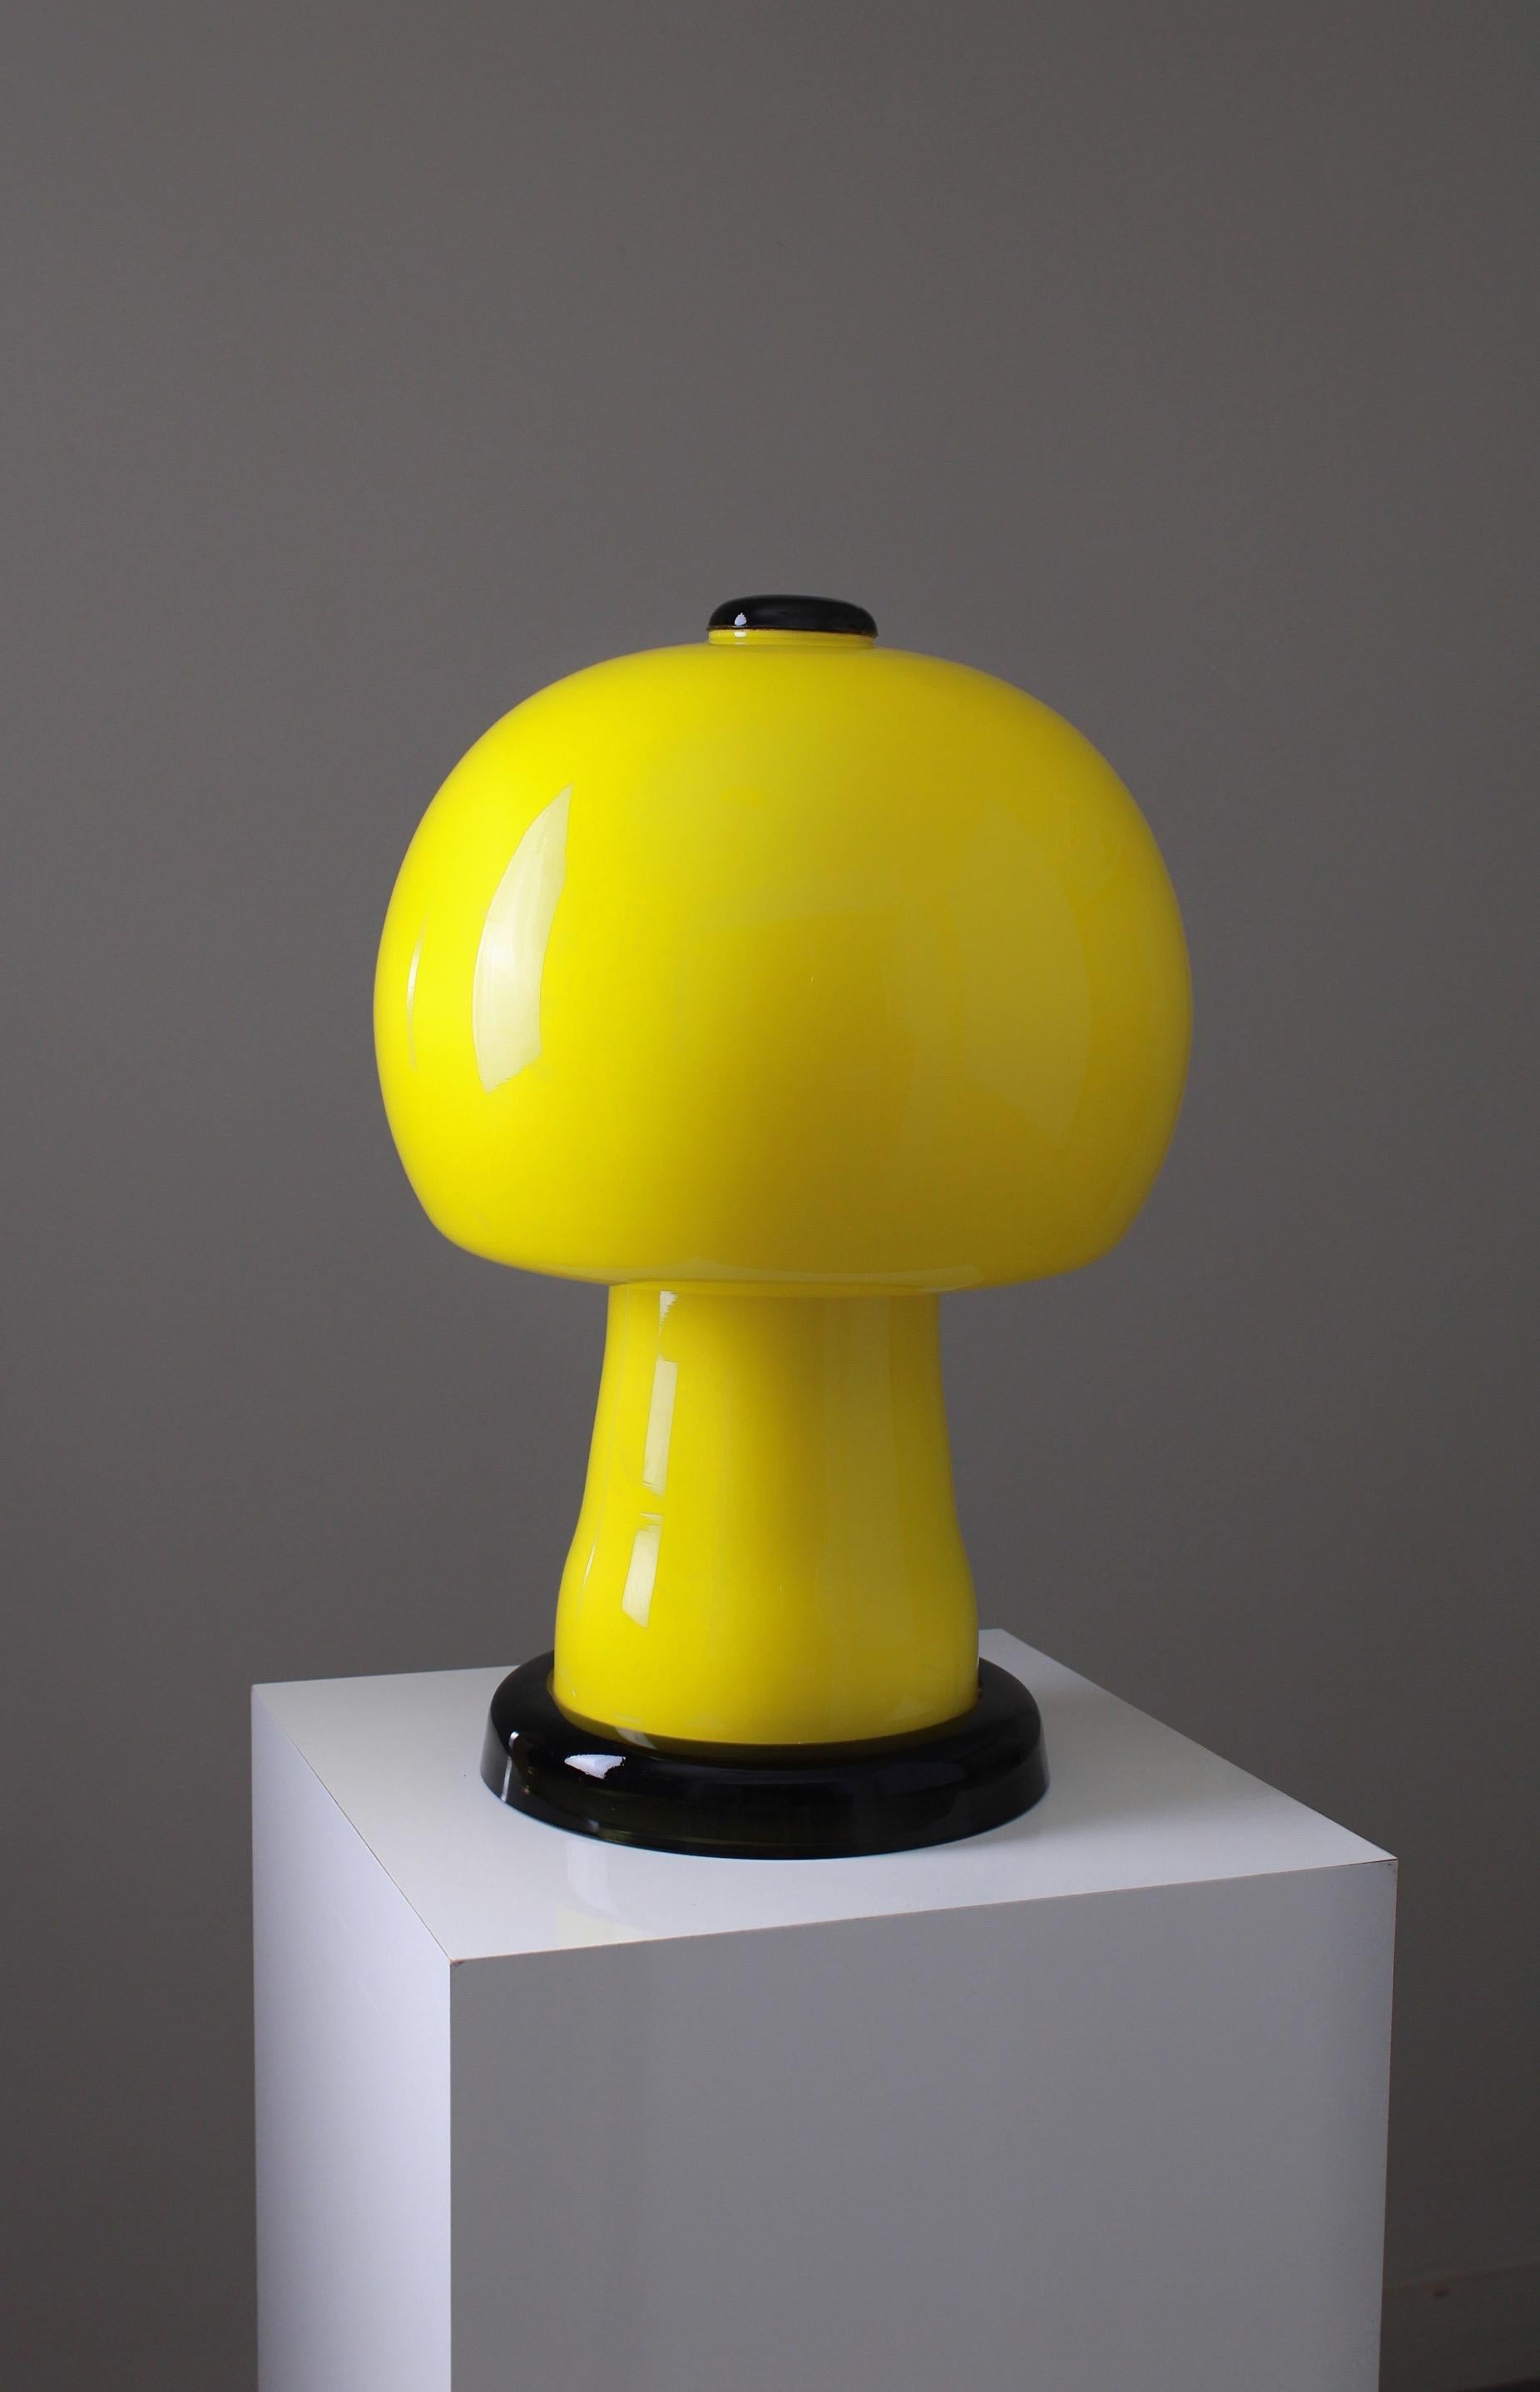 Rare table lamp, designed by Karin Korn for Beleuchtungsglaskombinat Görlitz. Produced in east Germany near the border of Poland. Beautifully made mushroom shaped lamp consisting of one piece of thick glass. Featuring a bright yellow primary color